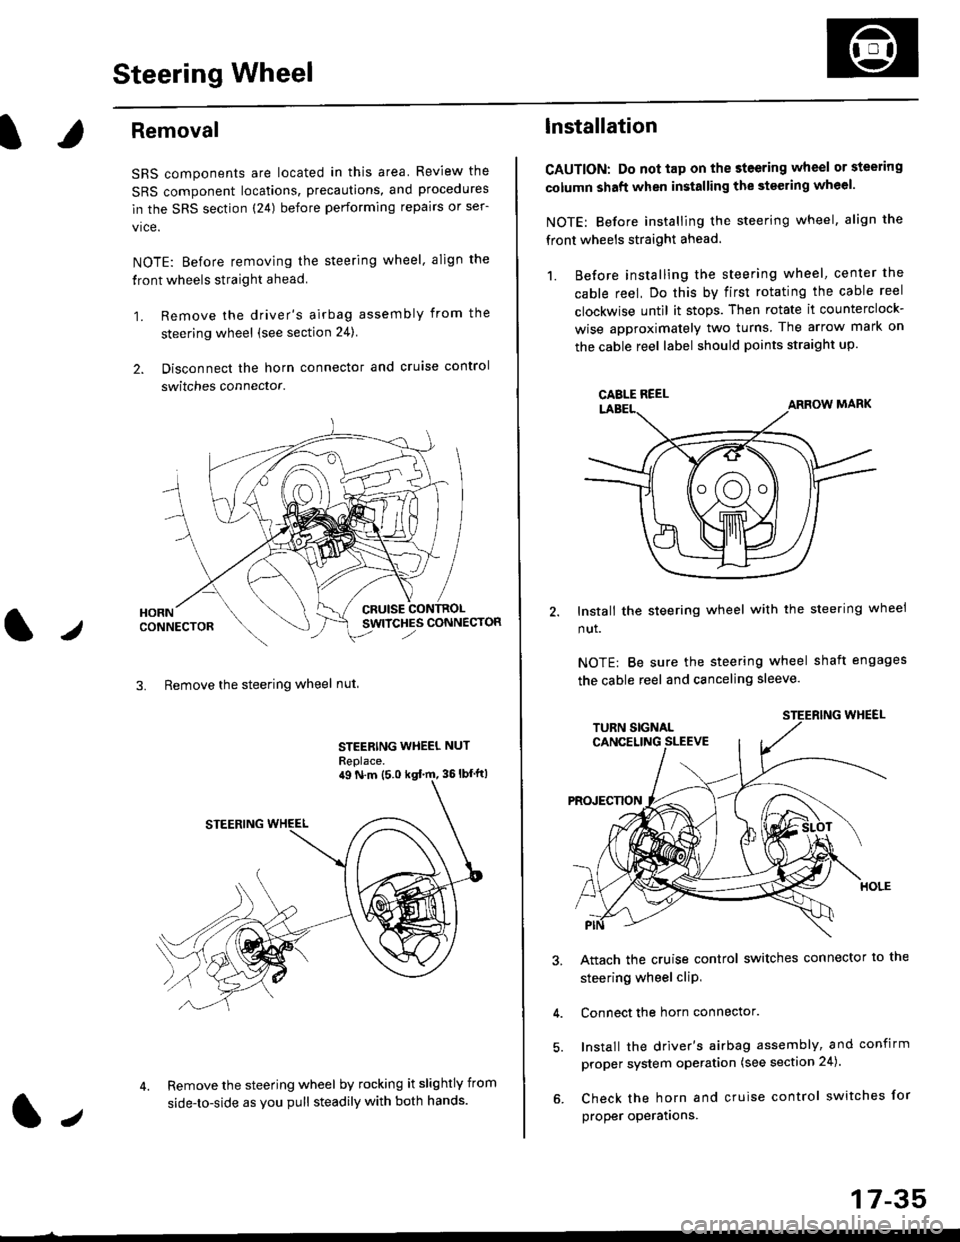 HONDA CIVIC 1996 6.G Workshop Manual Steering Wheel
l,/
Removal
SRS components are located in this area Review the
SRS component locations, precautions, and procedures
in the SRS section (24) before performing repairs or ser-
vice.
NOTE: